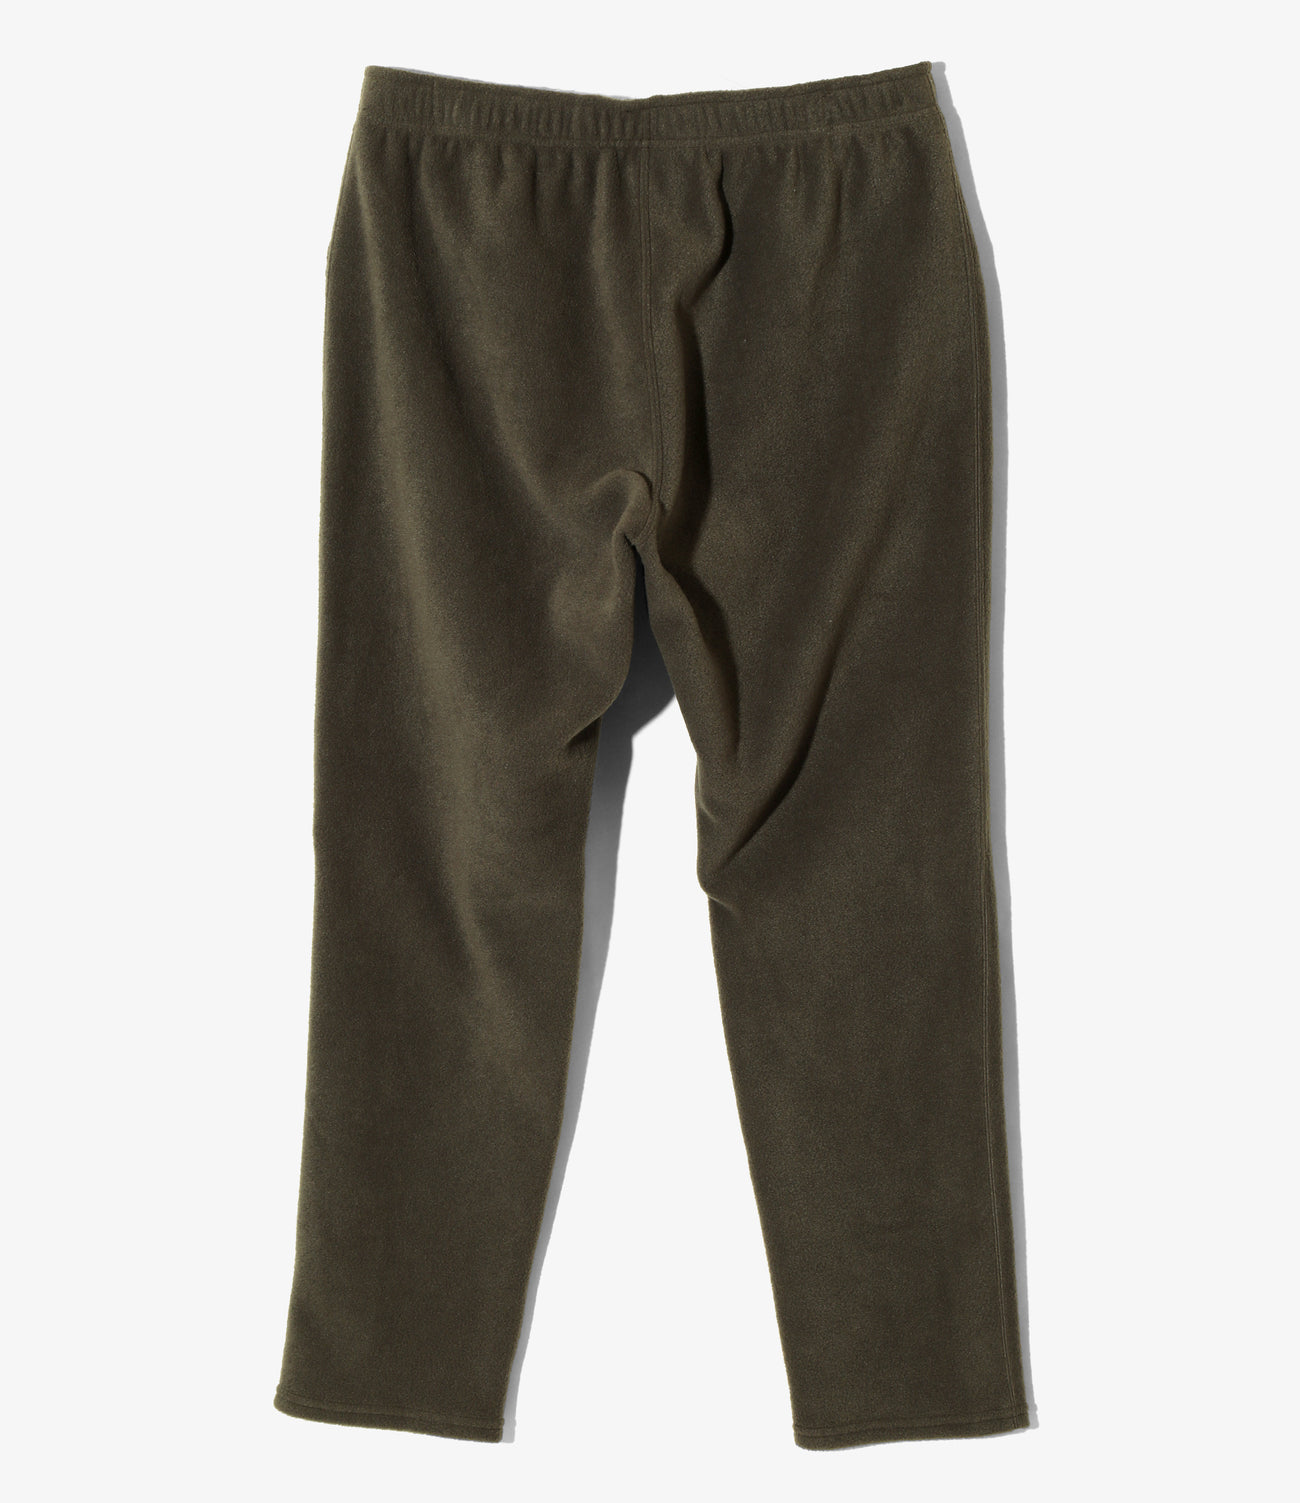 2P Cycle Pant - Olive - Poly Fleece